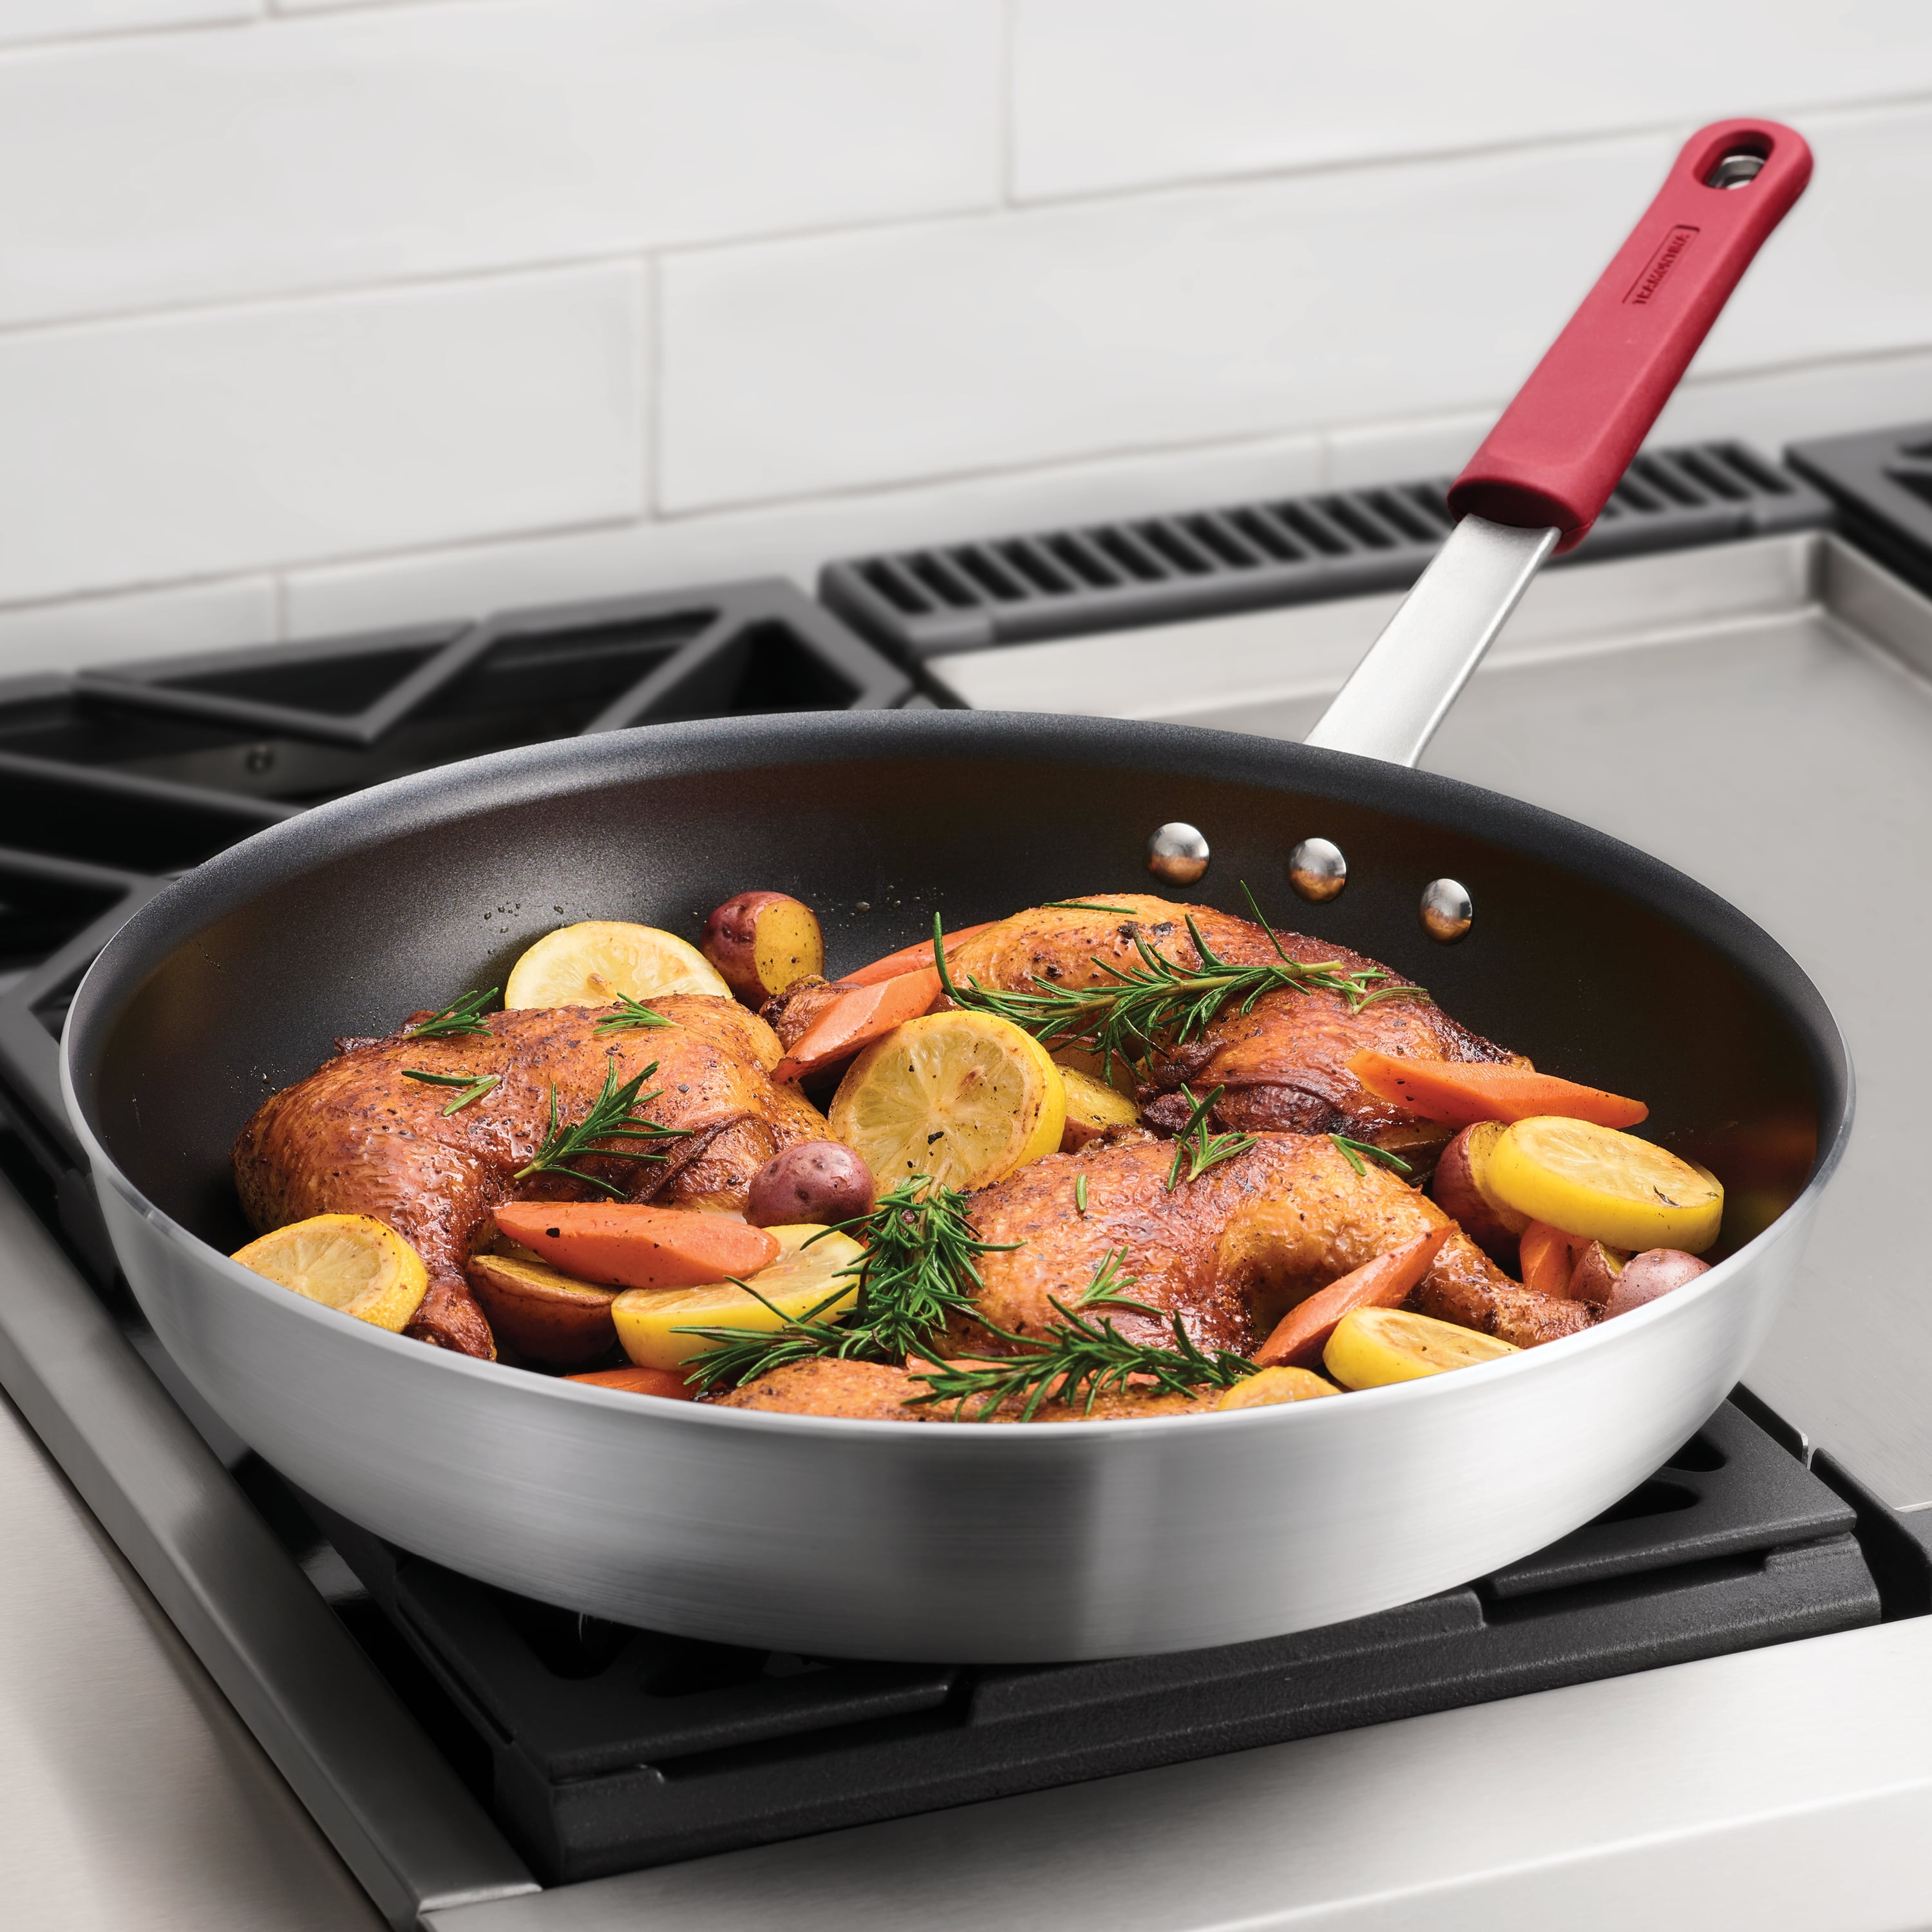  Tramontina PRO Fusion 14-Inch Aluminum Nonstick Fry Pan,  80114/521DS, Made in Brazil: Home & Kitchen